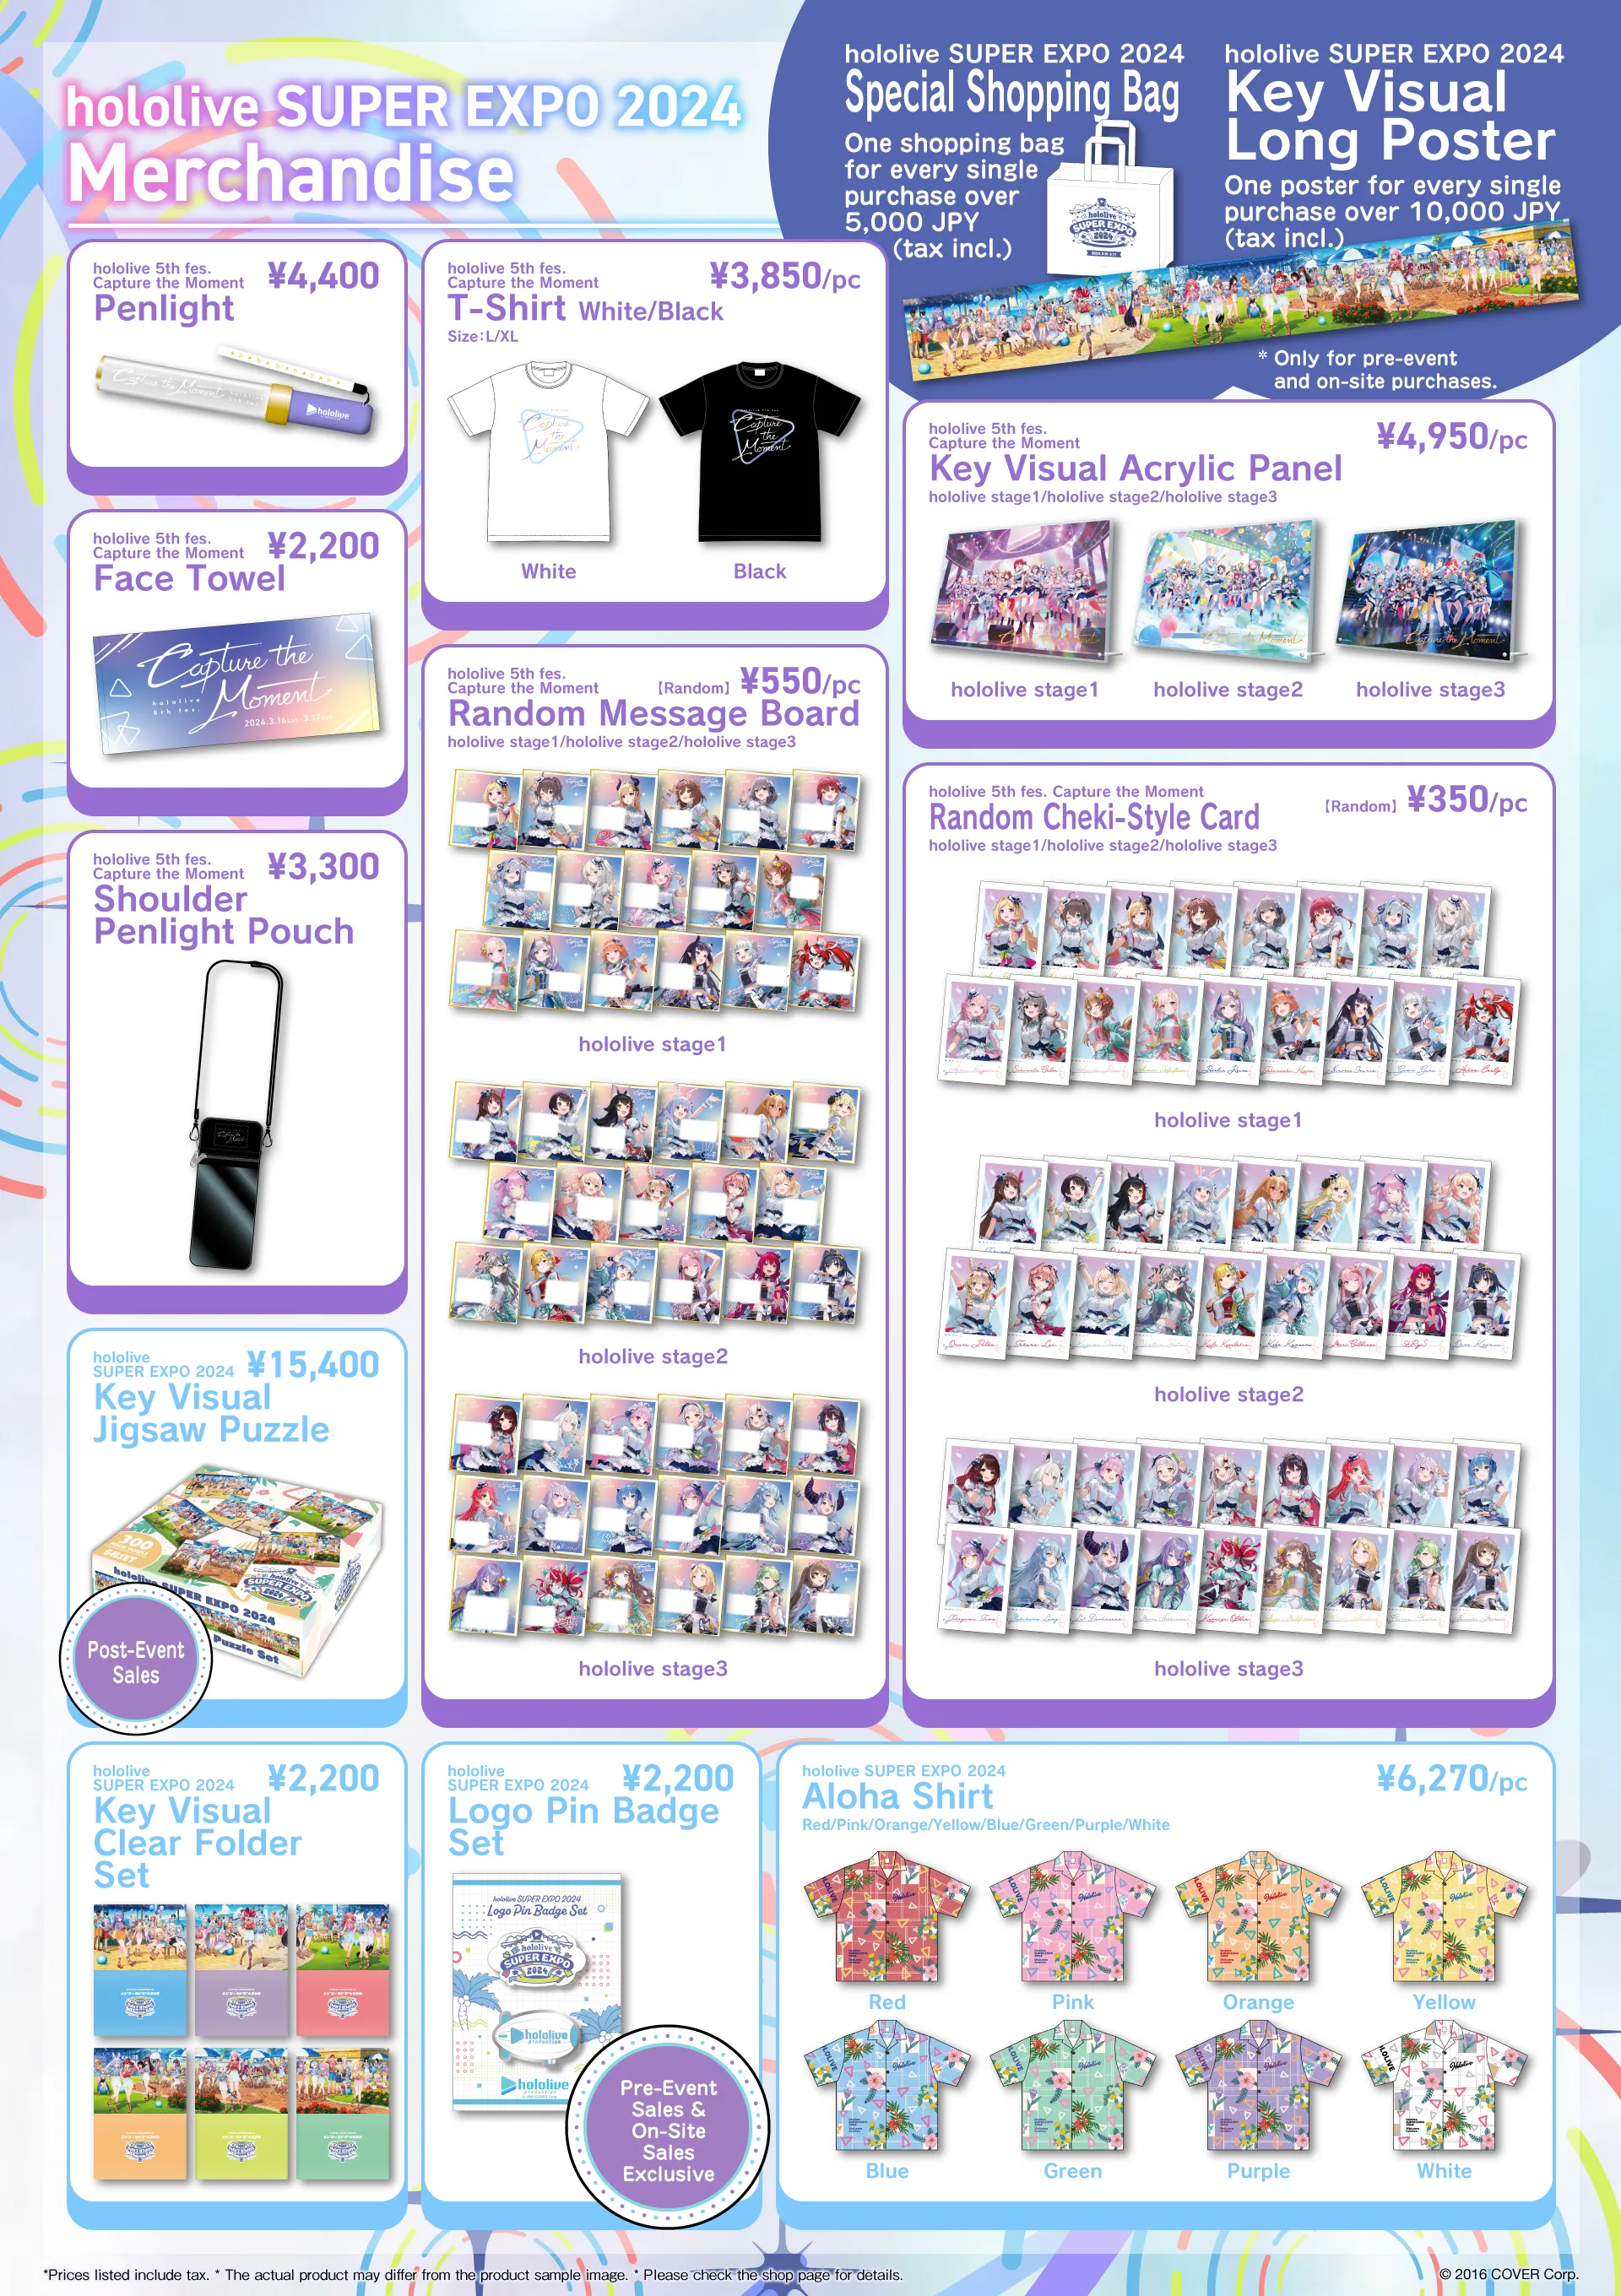 Merch hololive SUPER EXPO 2024 & hololive 5th fes. Capture the Moment